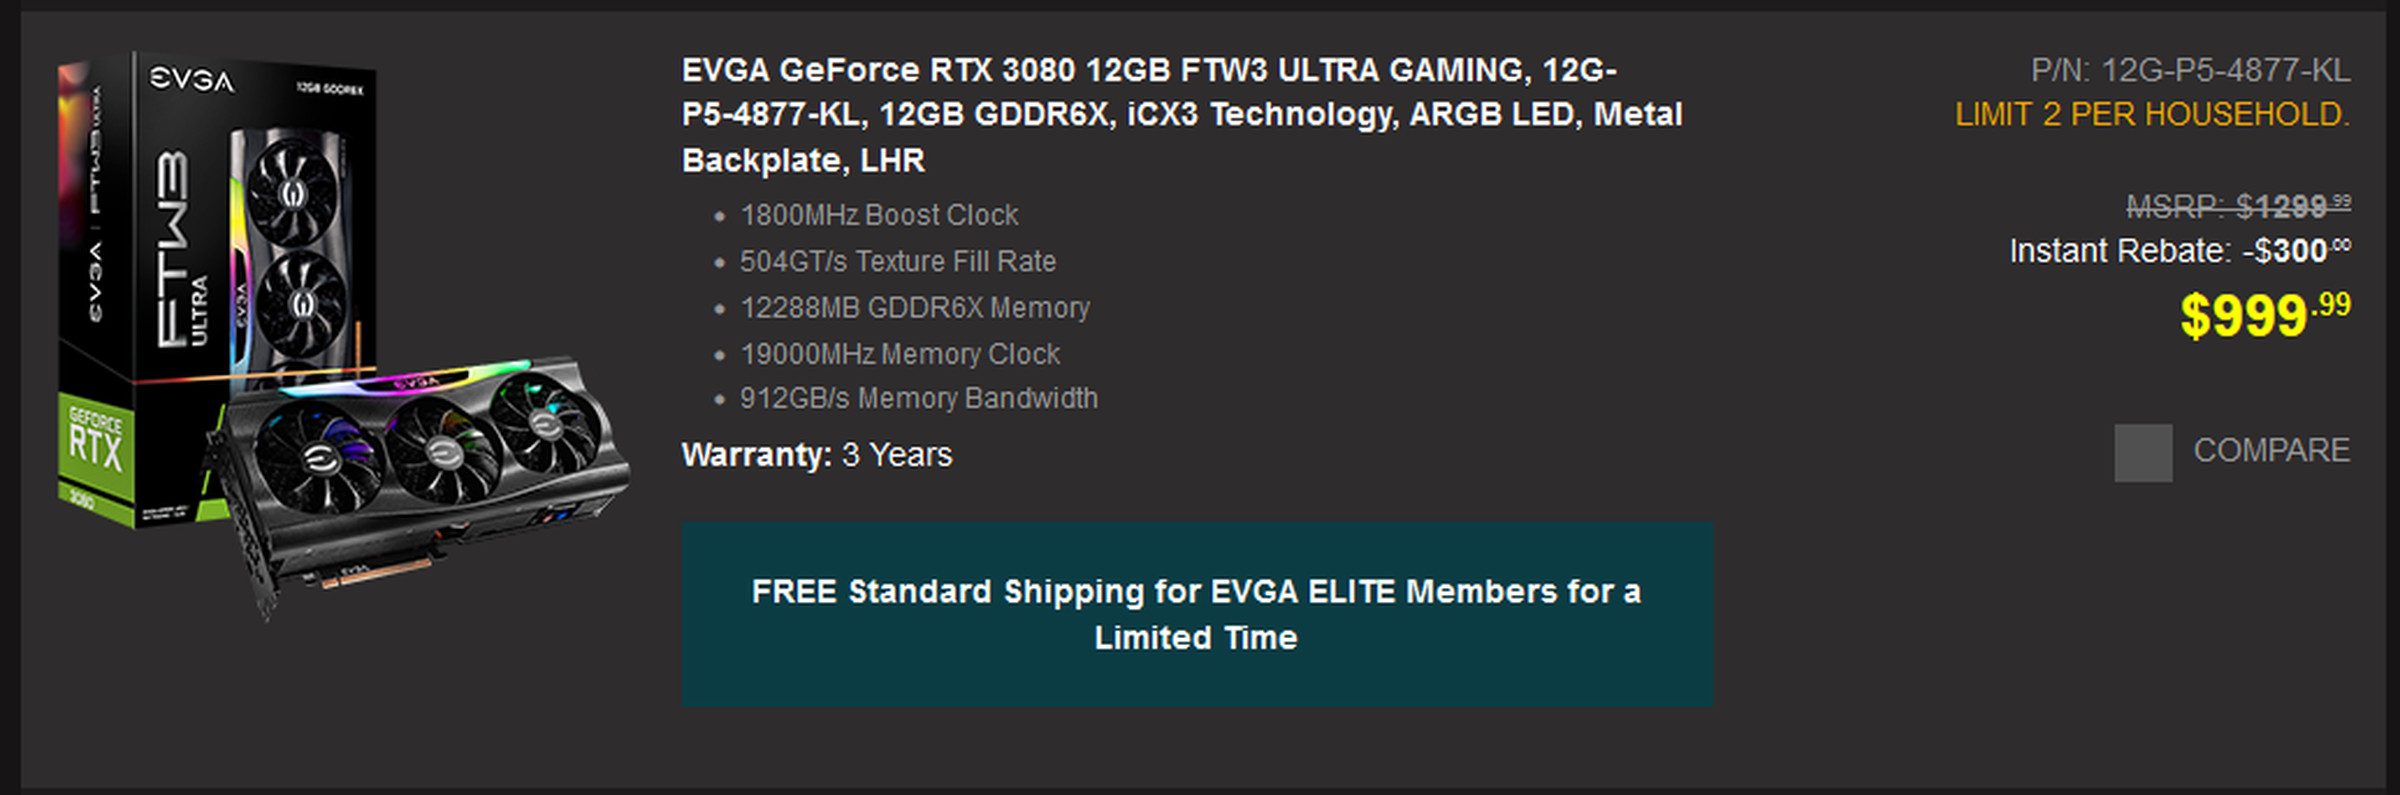 EVGA’s “instant rebate” brings the RTX 3080 12GB down to $1,000, but that’s just the going rate now.